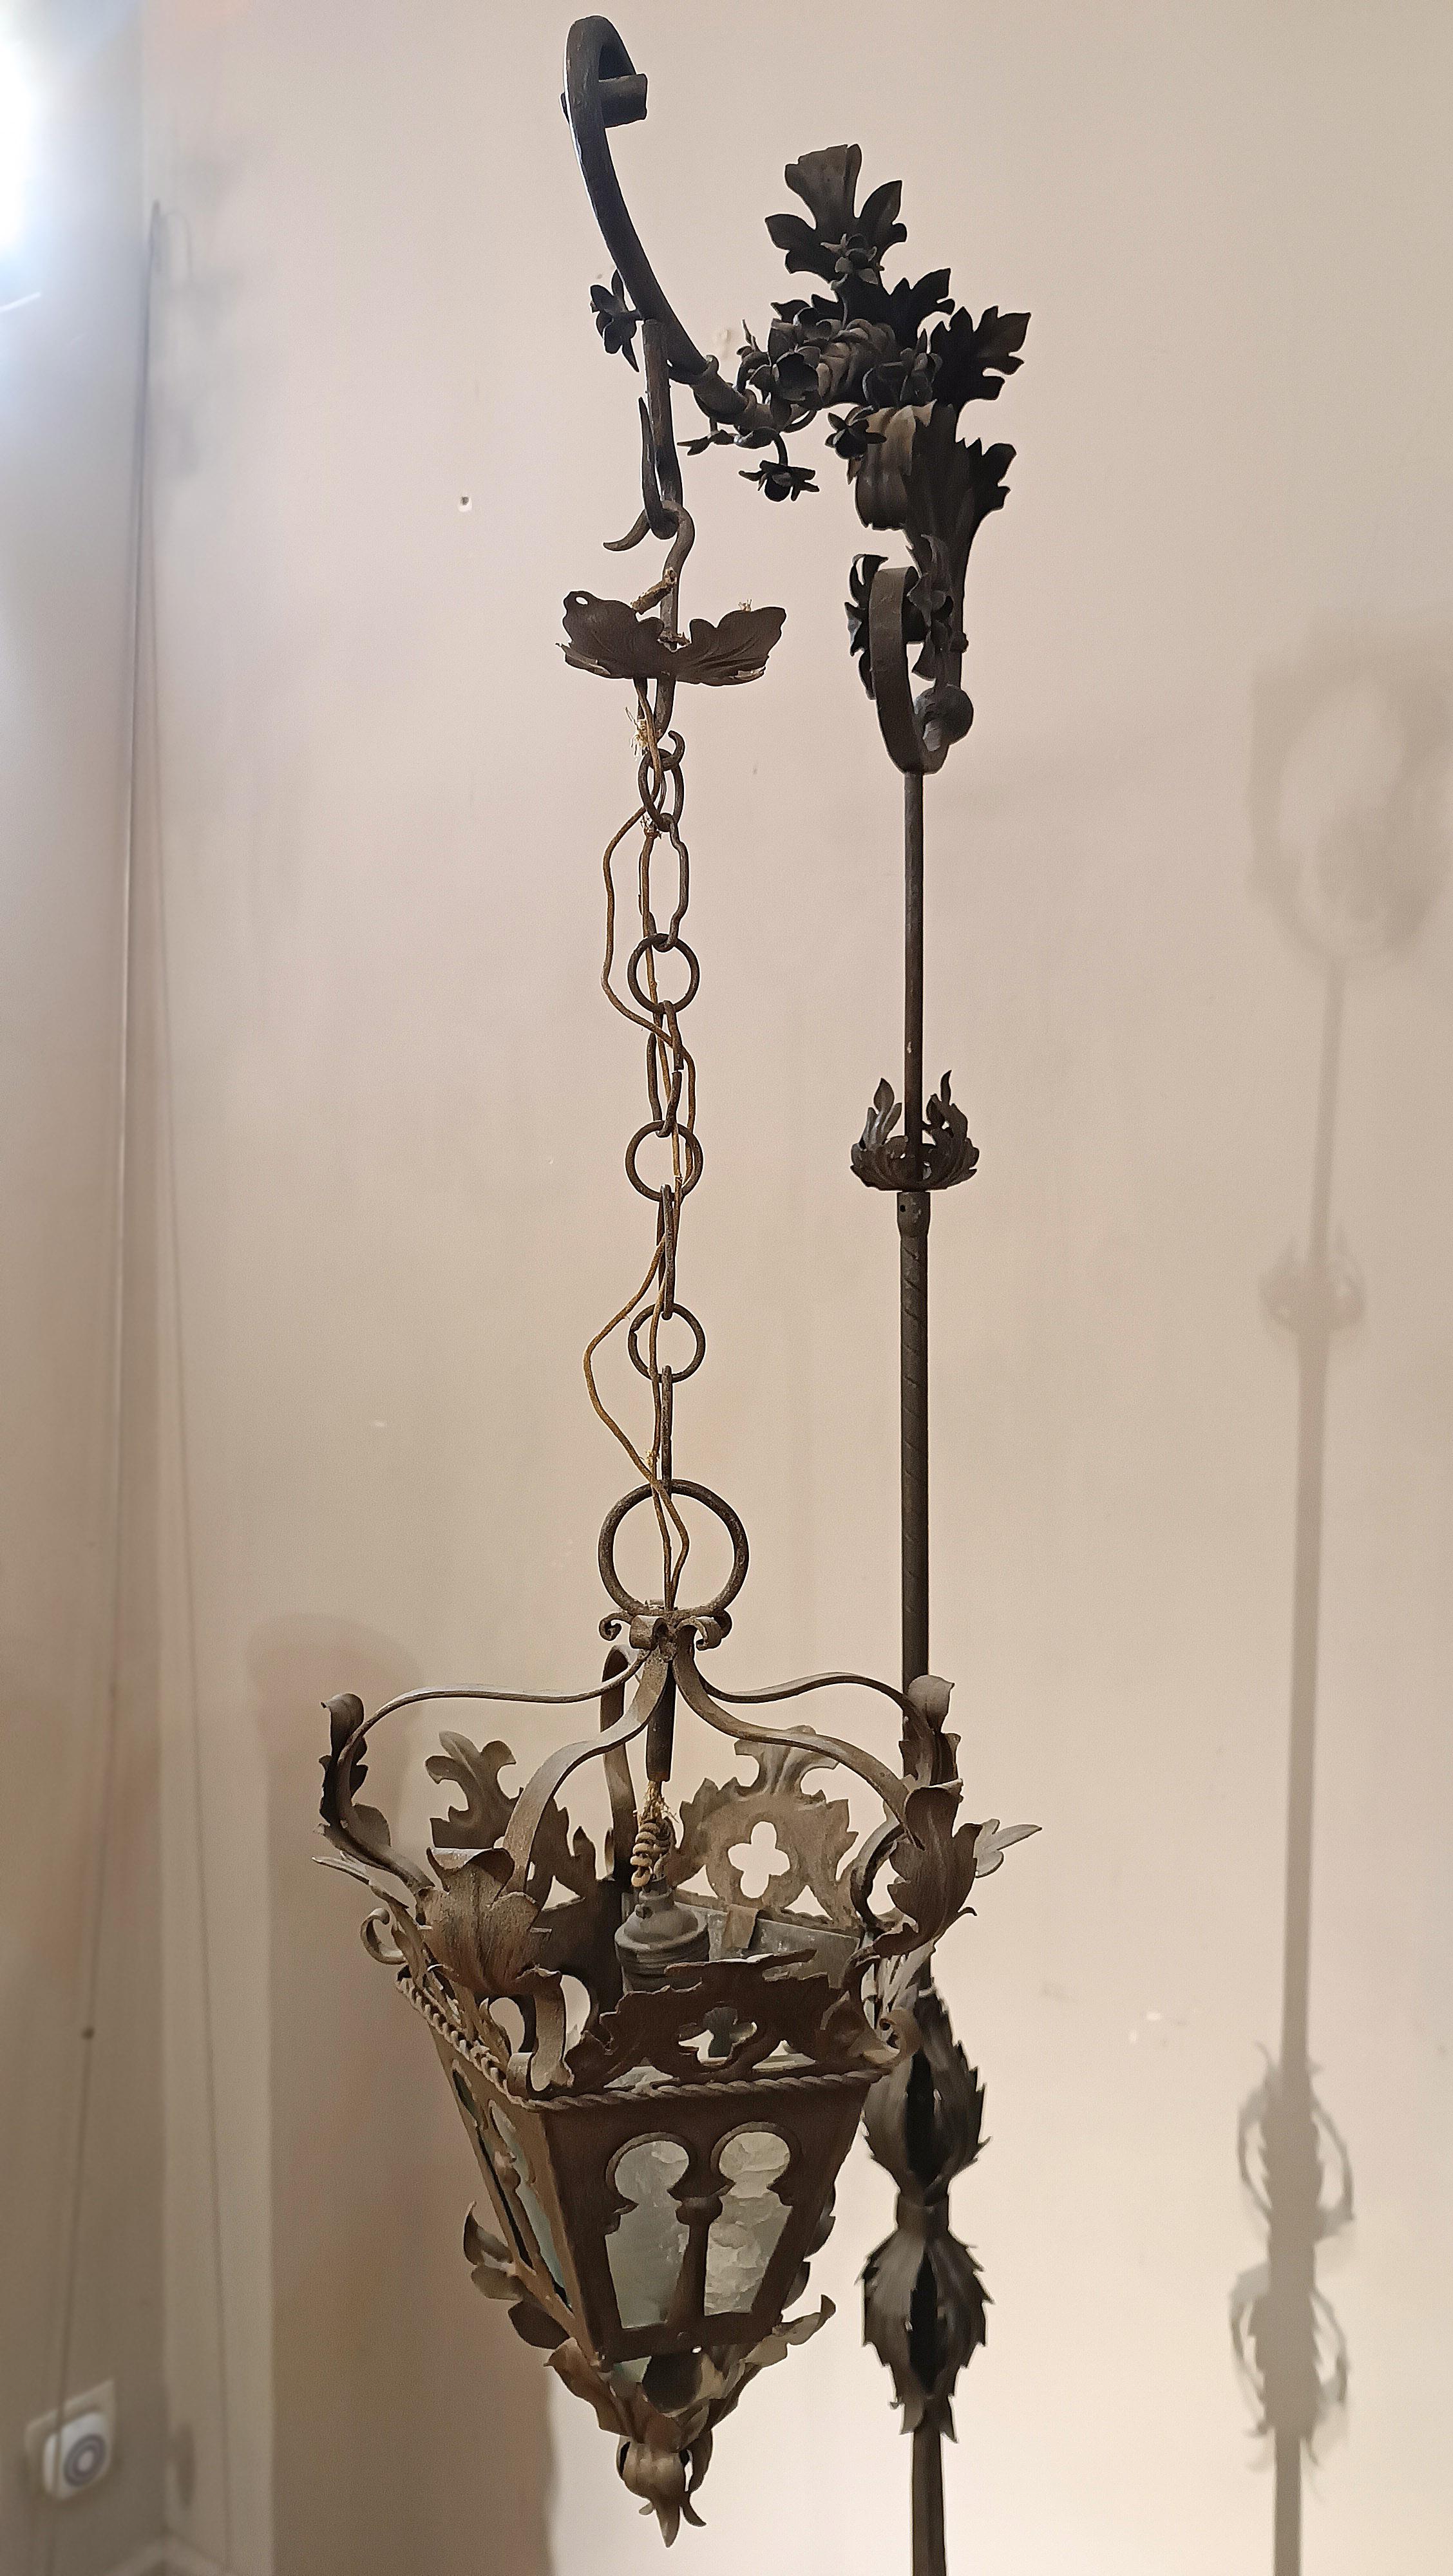 END OF THE 19th CENTURY IRON LANTERN HOLDER In Good Condition For Sale In Firenze, FI